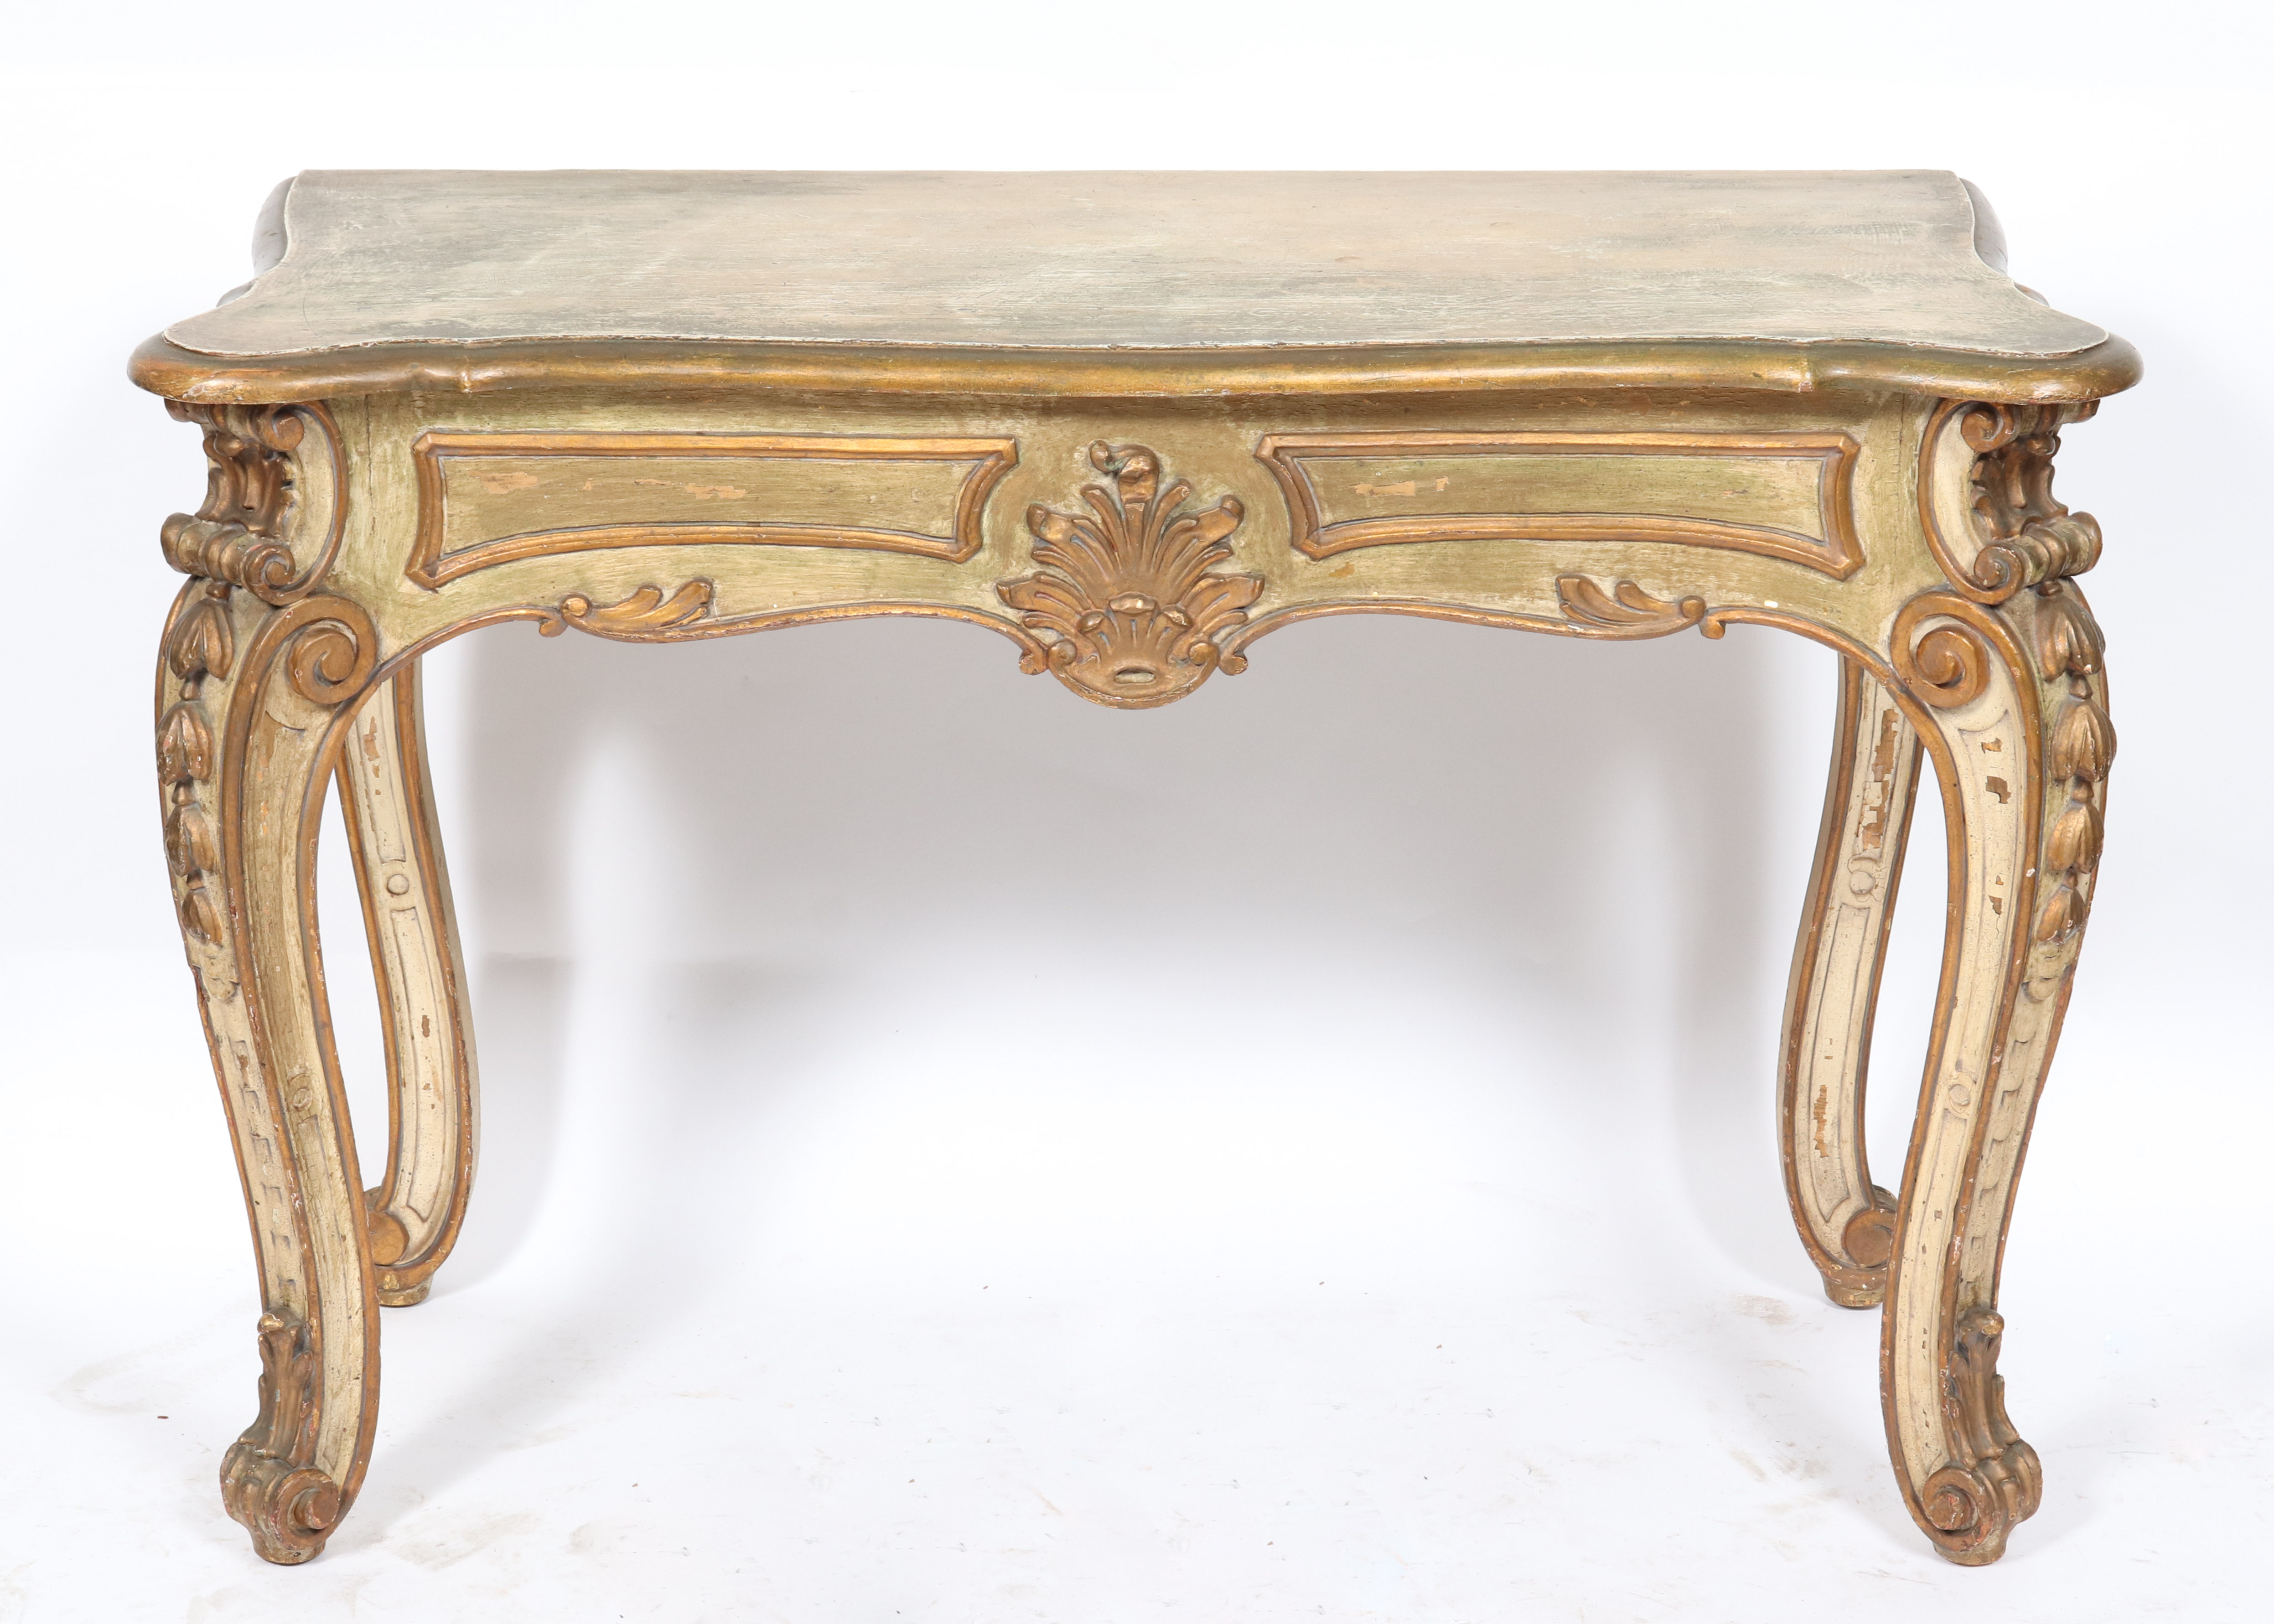 ITALIAN ROCOCO MANNER PAINTED CONSOLE 3c302a